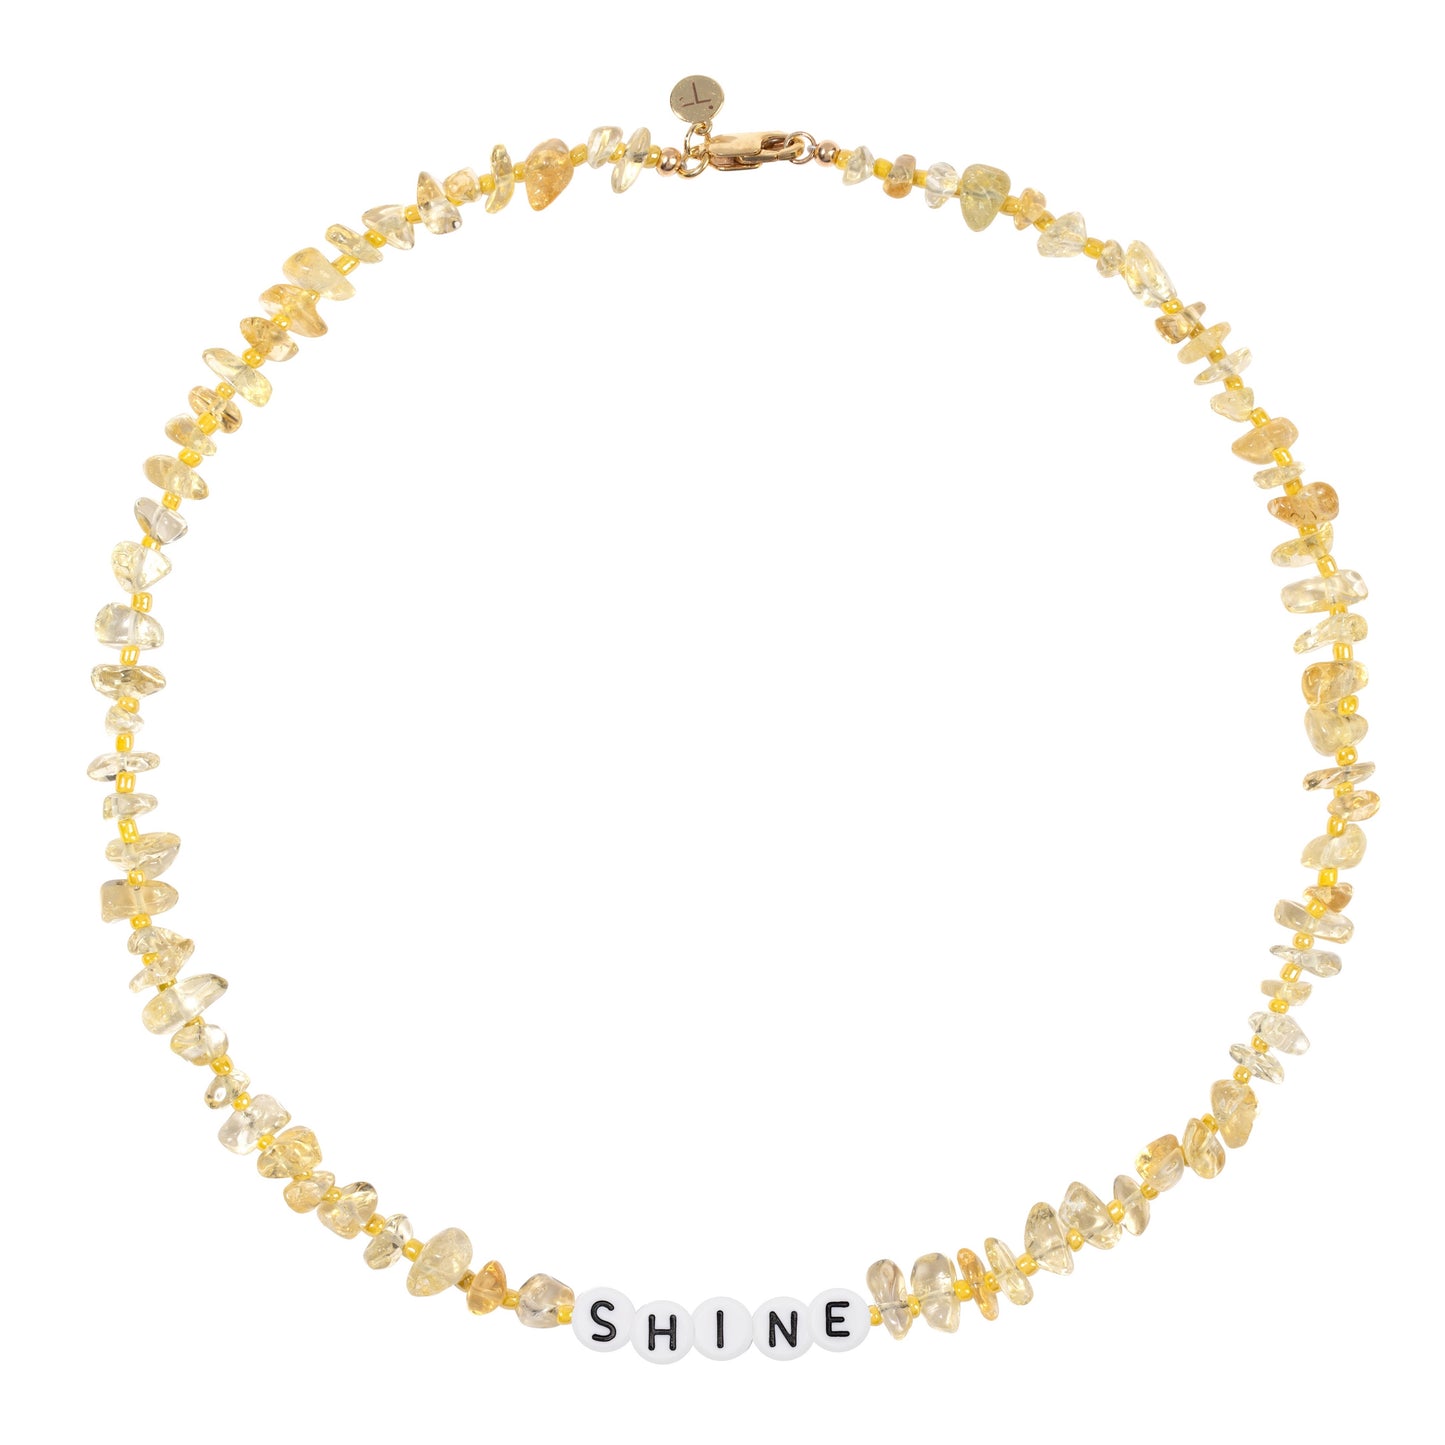 SHINE Citrine Crystal Healing Necklace